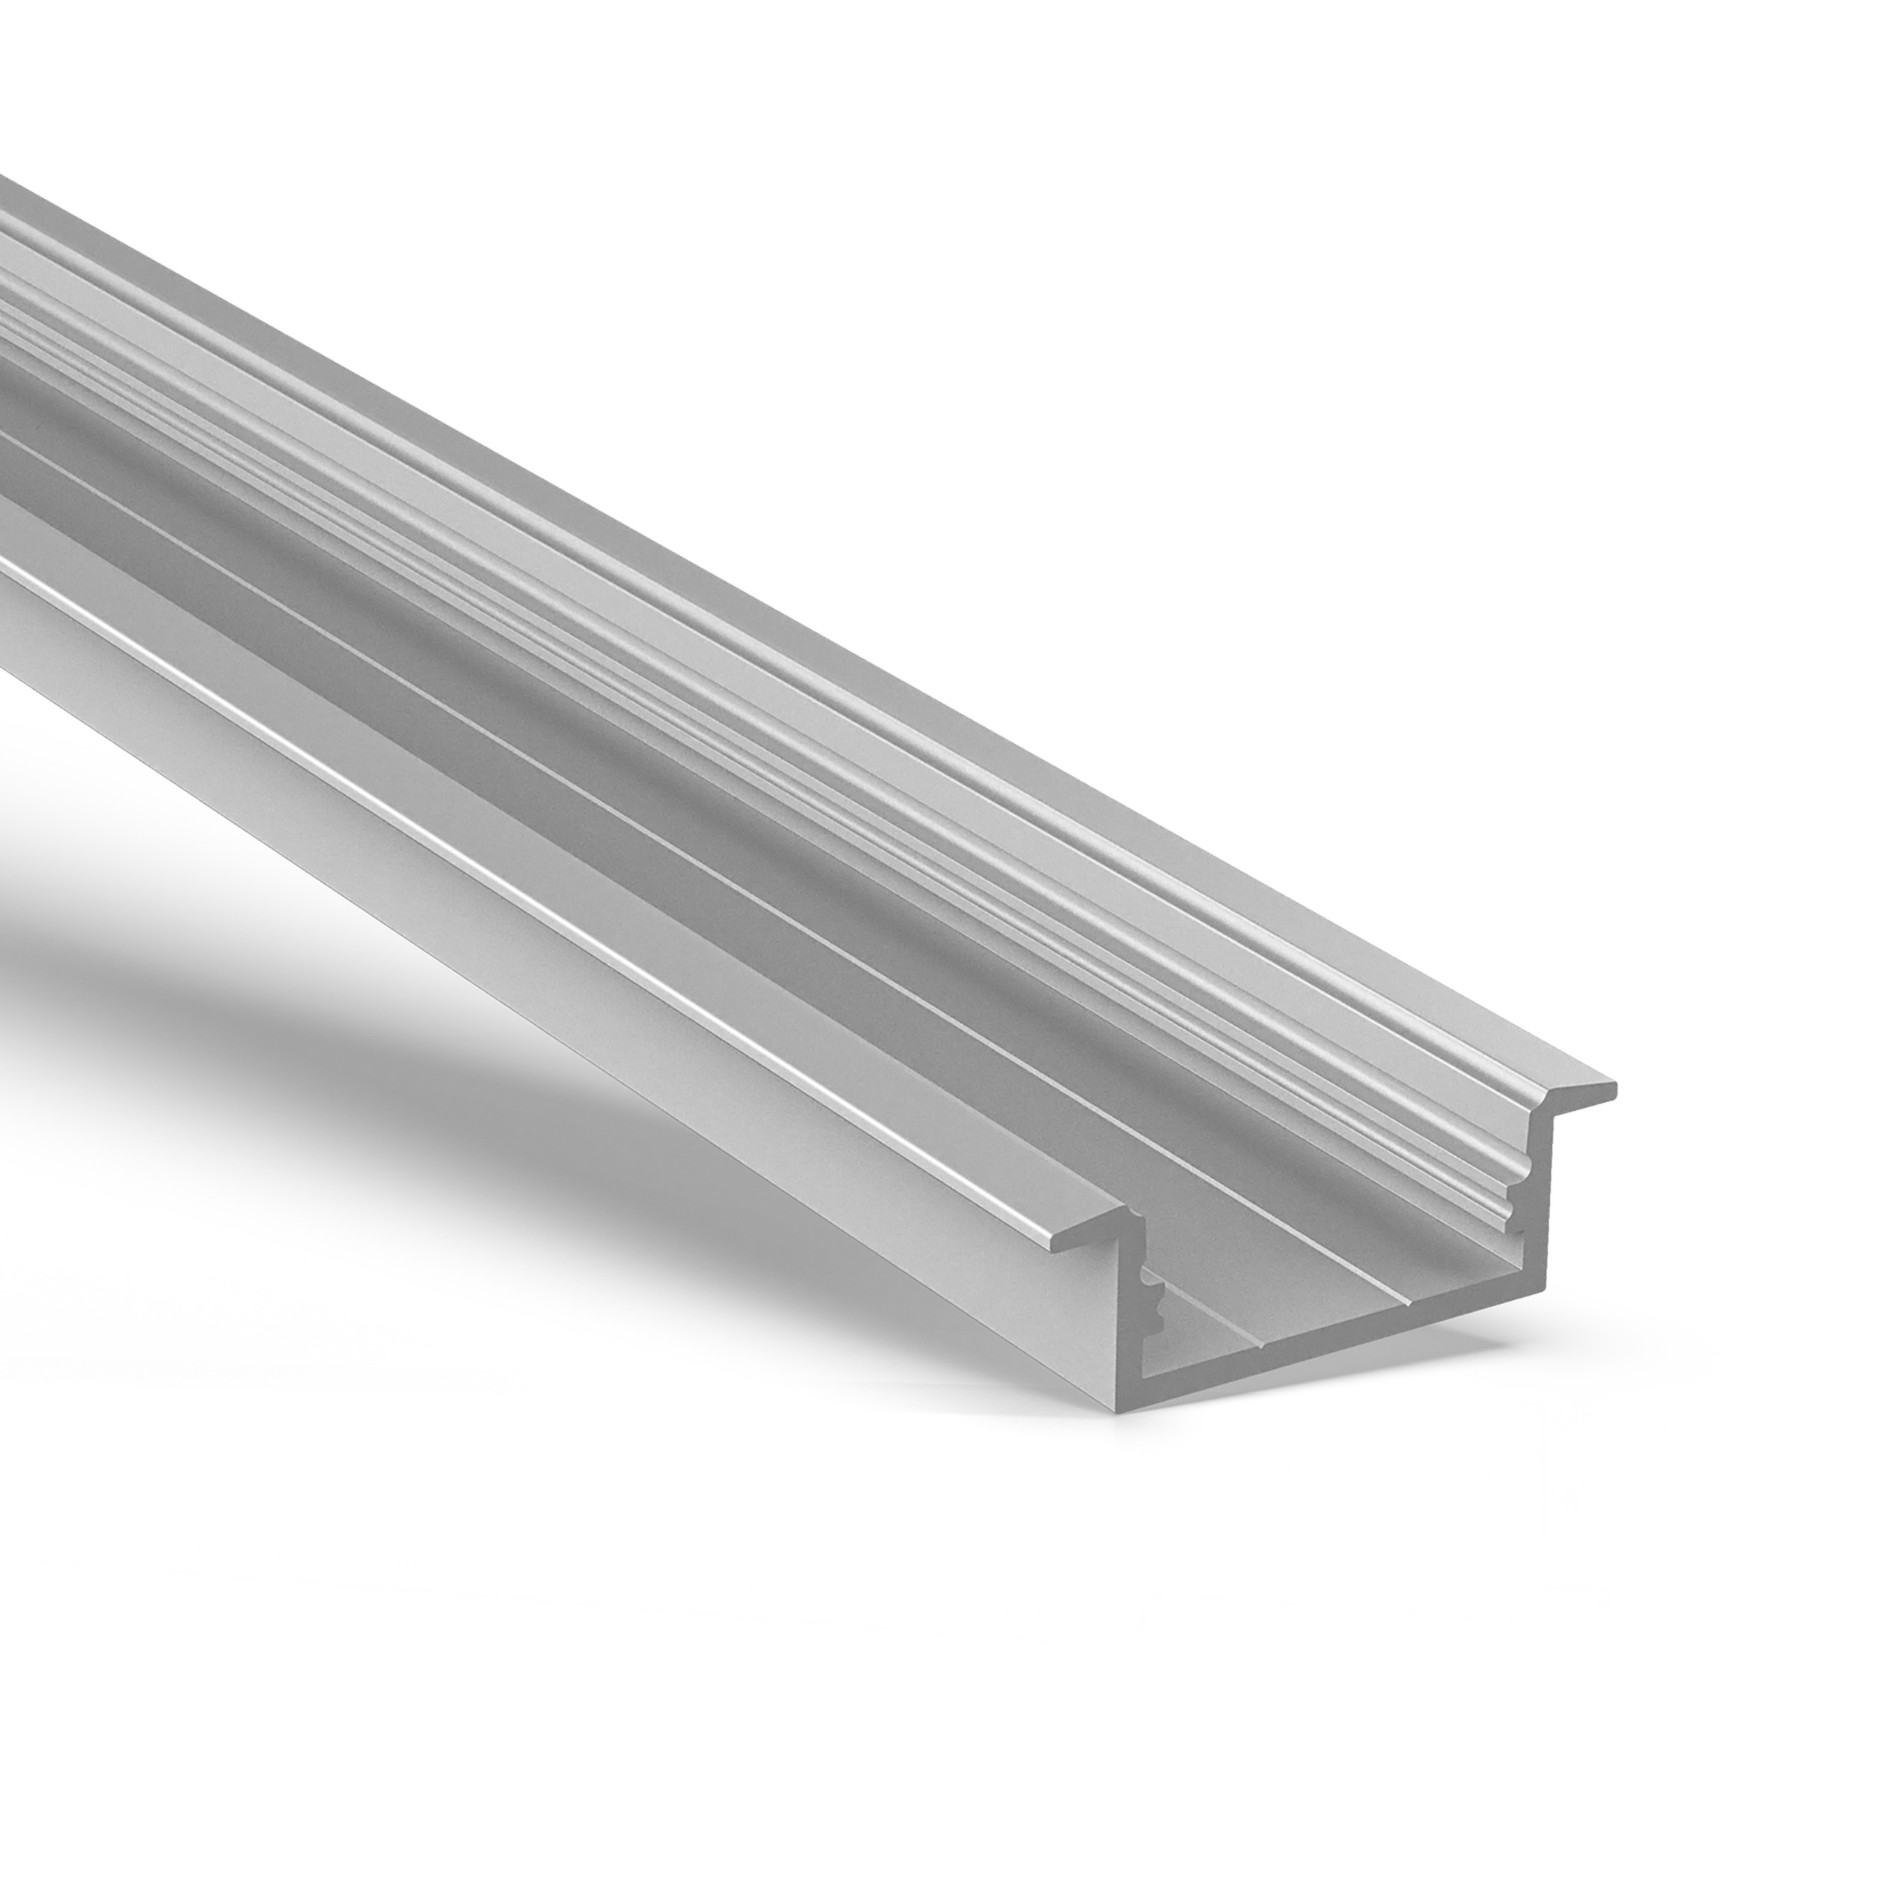 supply-ar3-rebate-aluminium-profile-and-diffuser-with-spot-free-cover